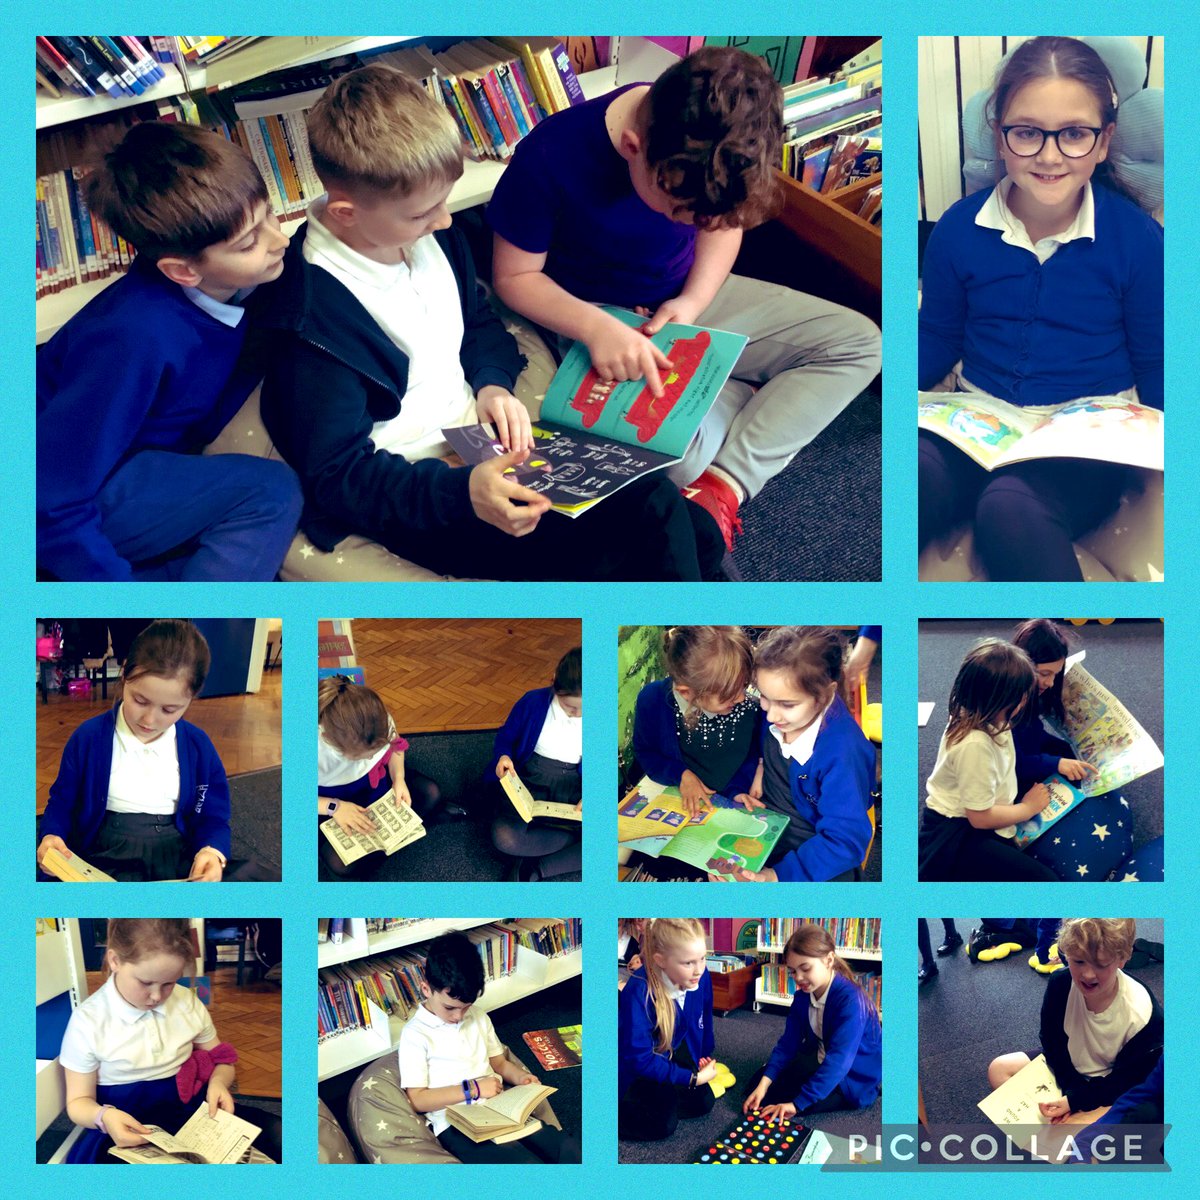 Loving our library time! 💙
@Astley_Primary 
#welovebooks #aps #keeplearning #ace #penguinsareace #aceastley